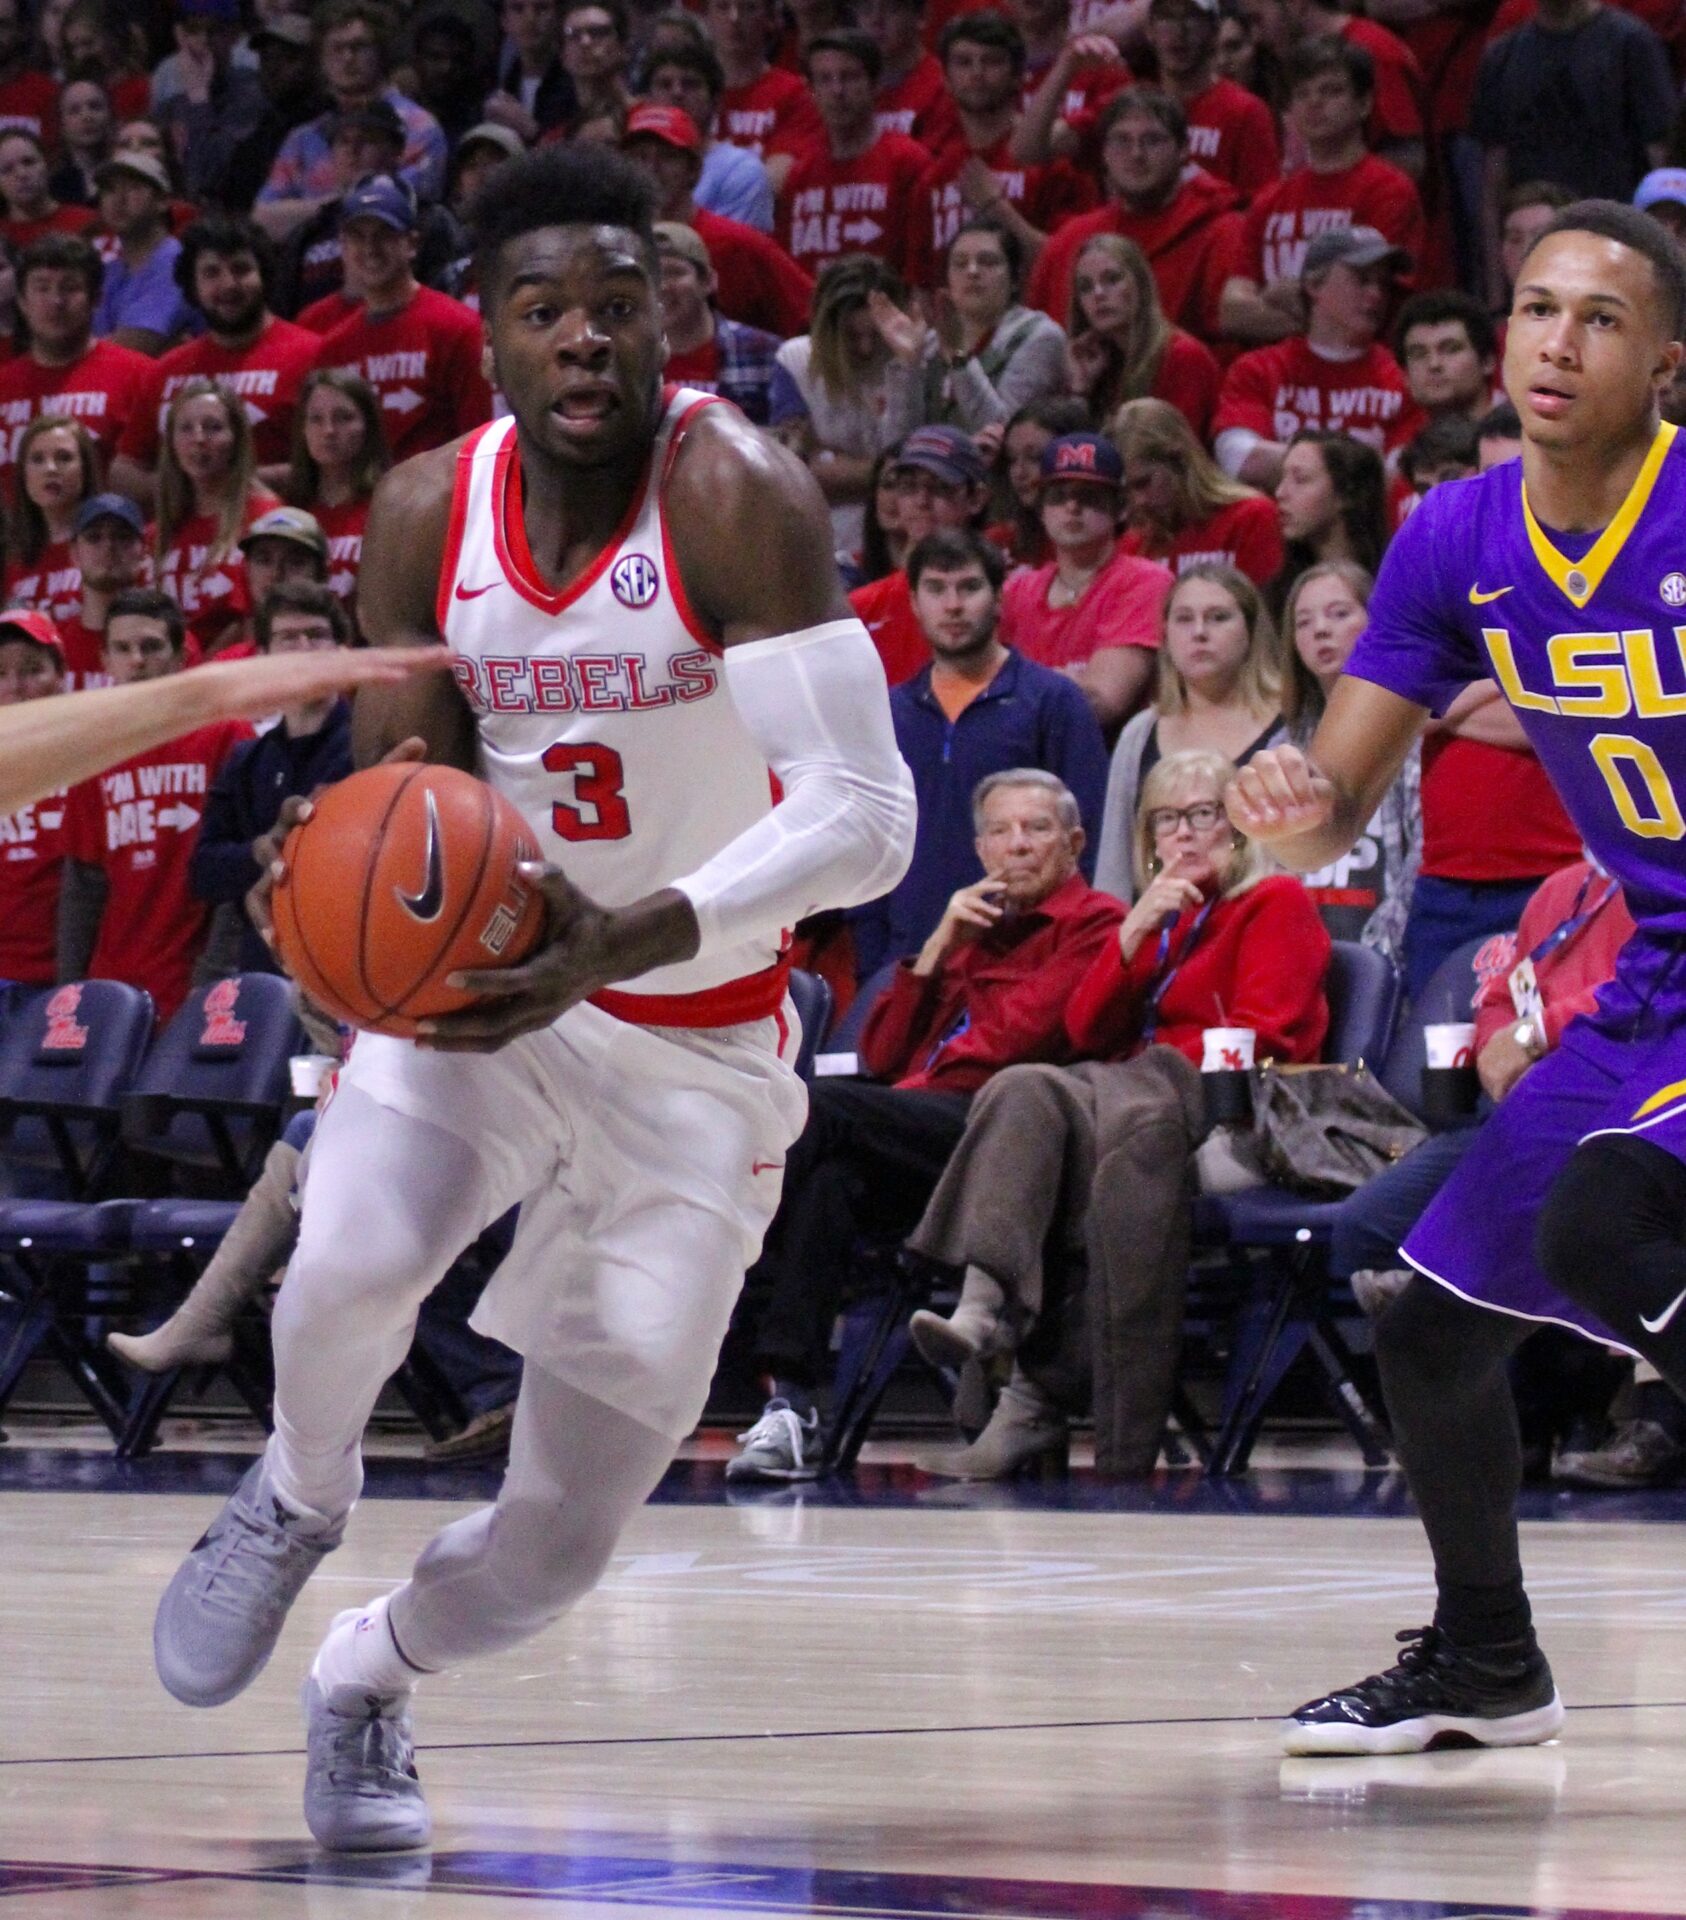 Ole Miss basketball defeats Syracuse to advance in NIT; Terrance Davis scores 30